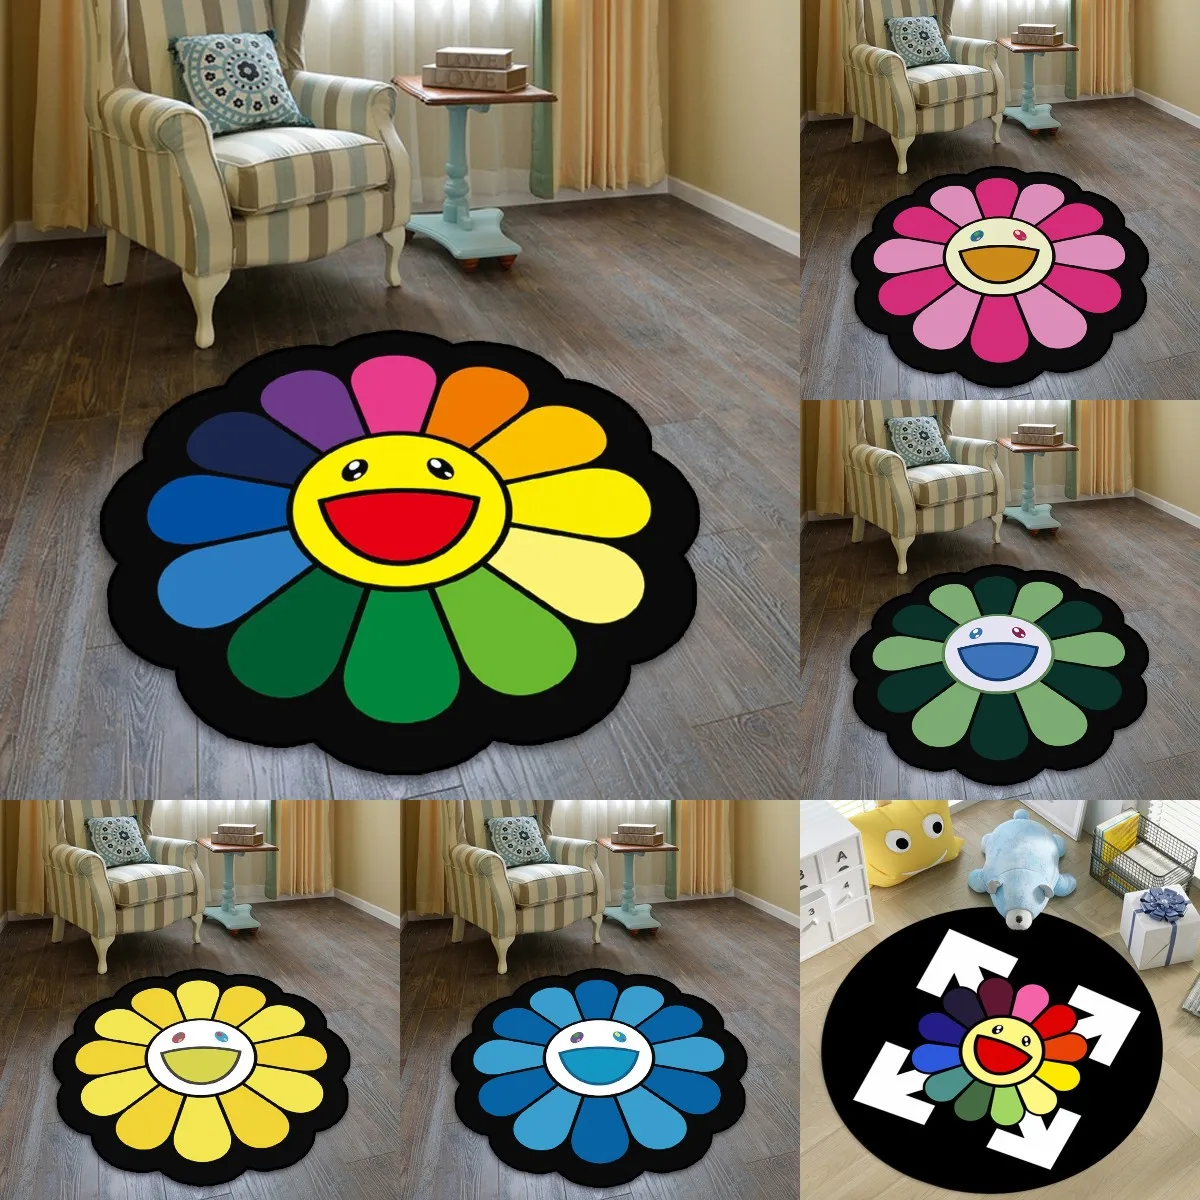 

Sun Flower Smiley Round Carpet for Bedroom Bedside Living Room Area Rug Lint-free Doormat Chair Mats Fashion Floor Mat Anti-skid